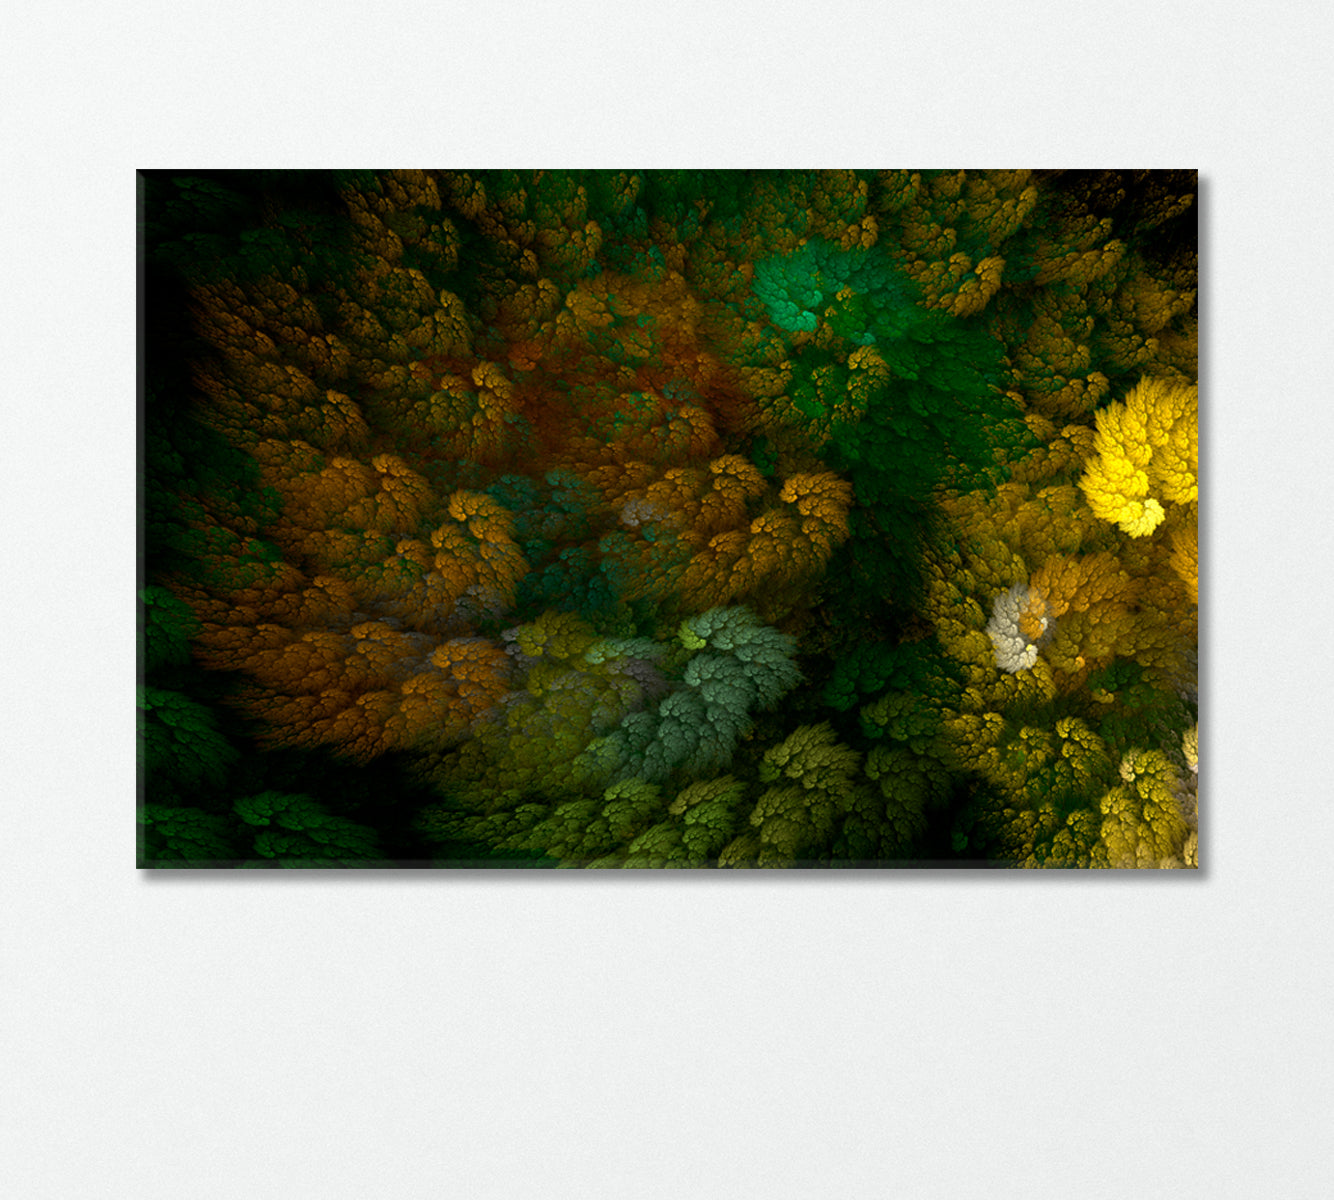 Abstract Multicolor Forest Canvas Print-Canvas Print-CetArt-1 Panel-24x16 inches-CetArt